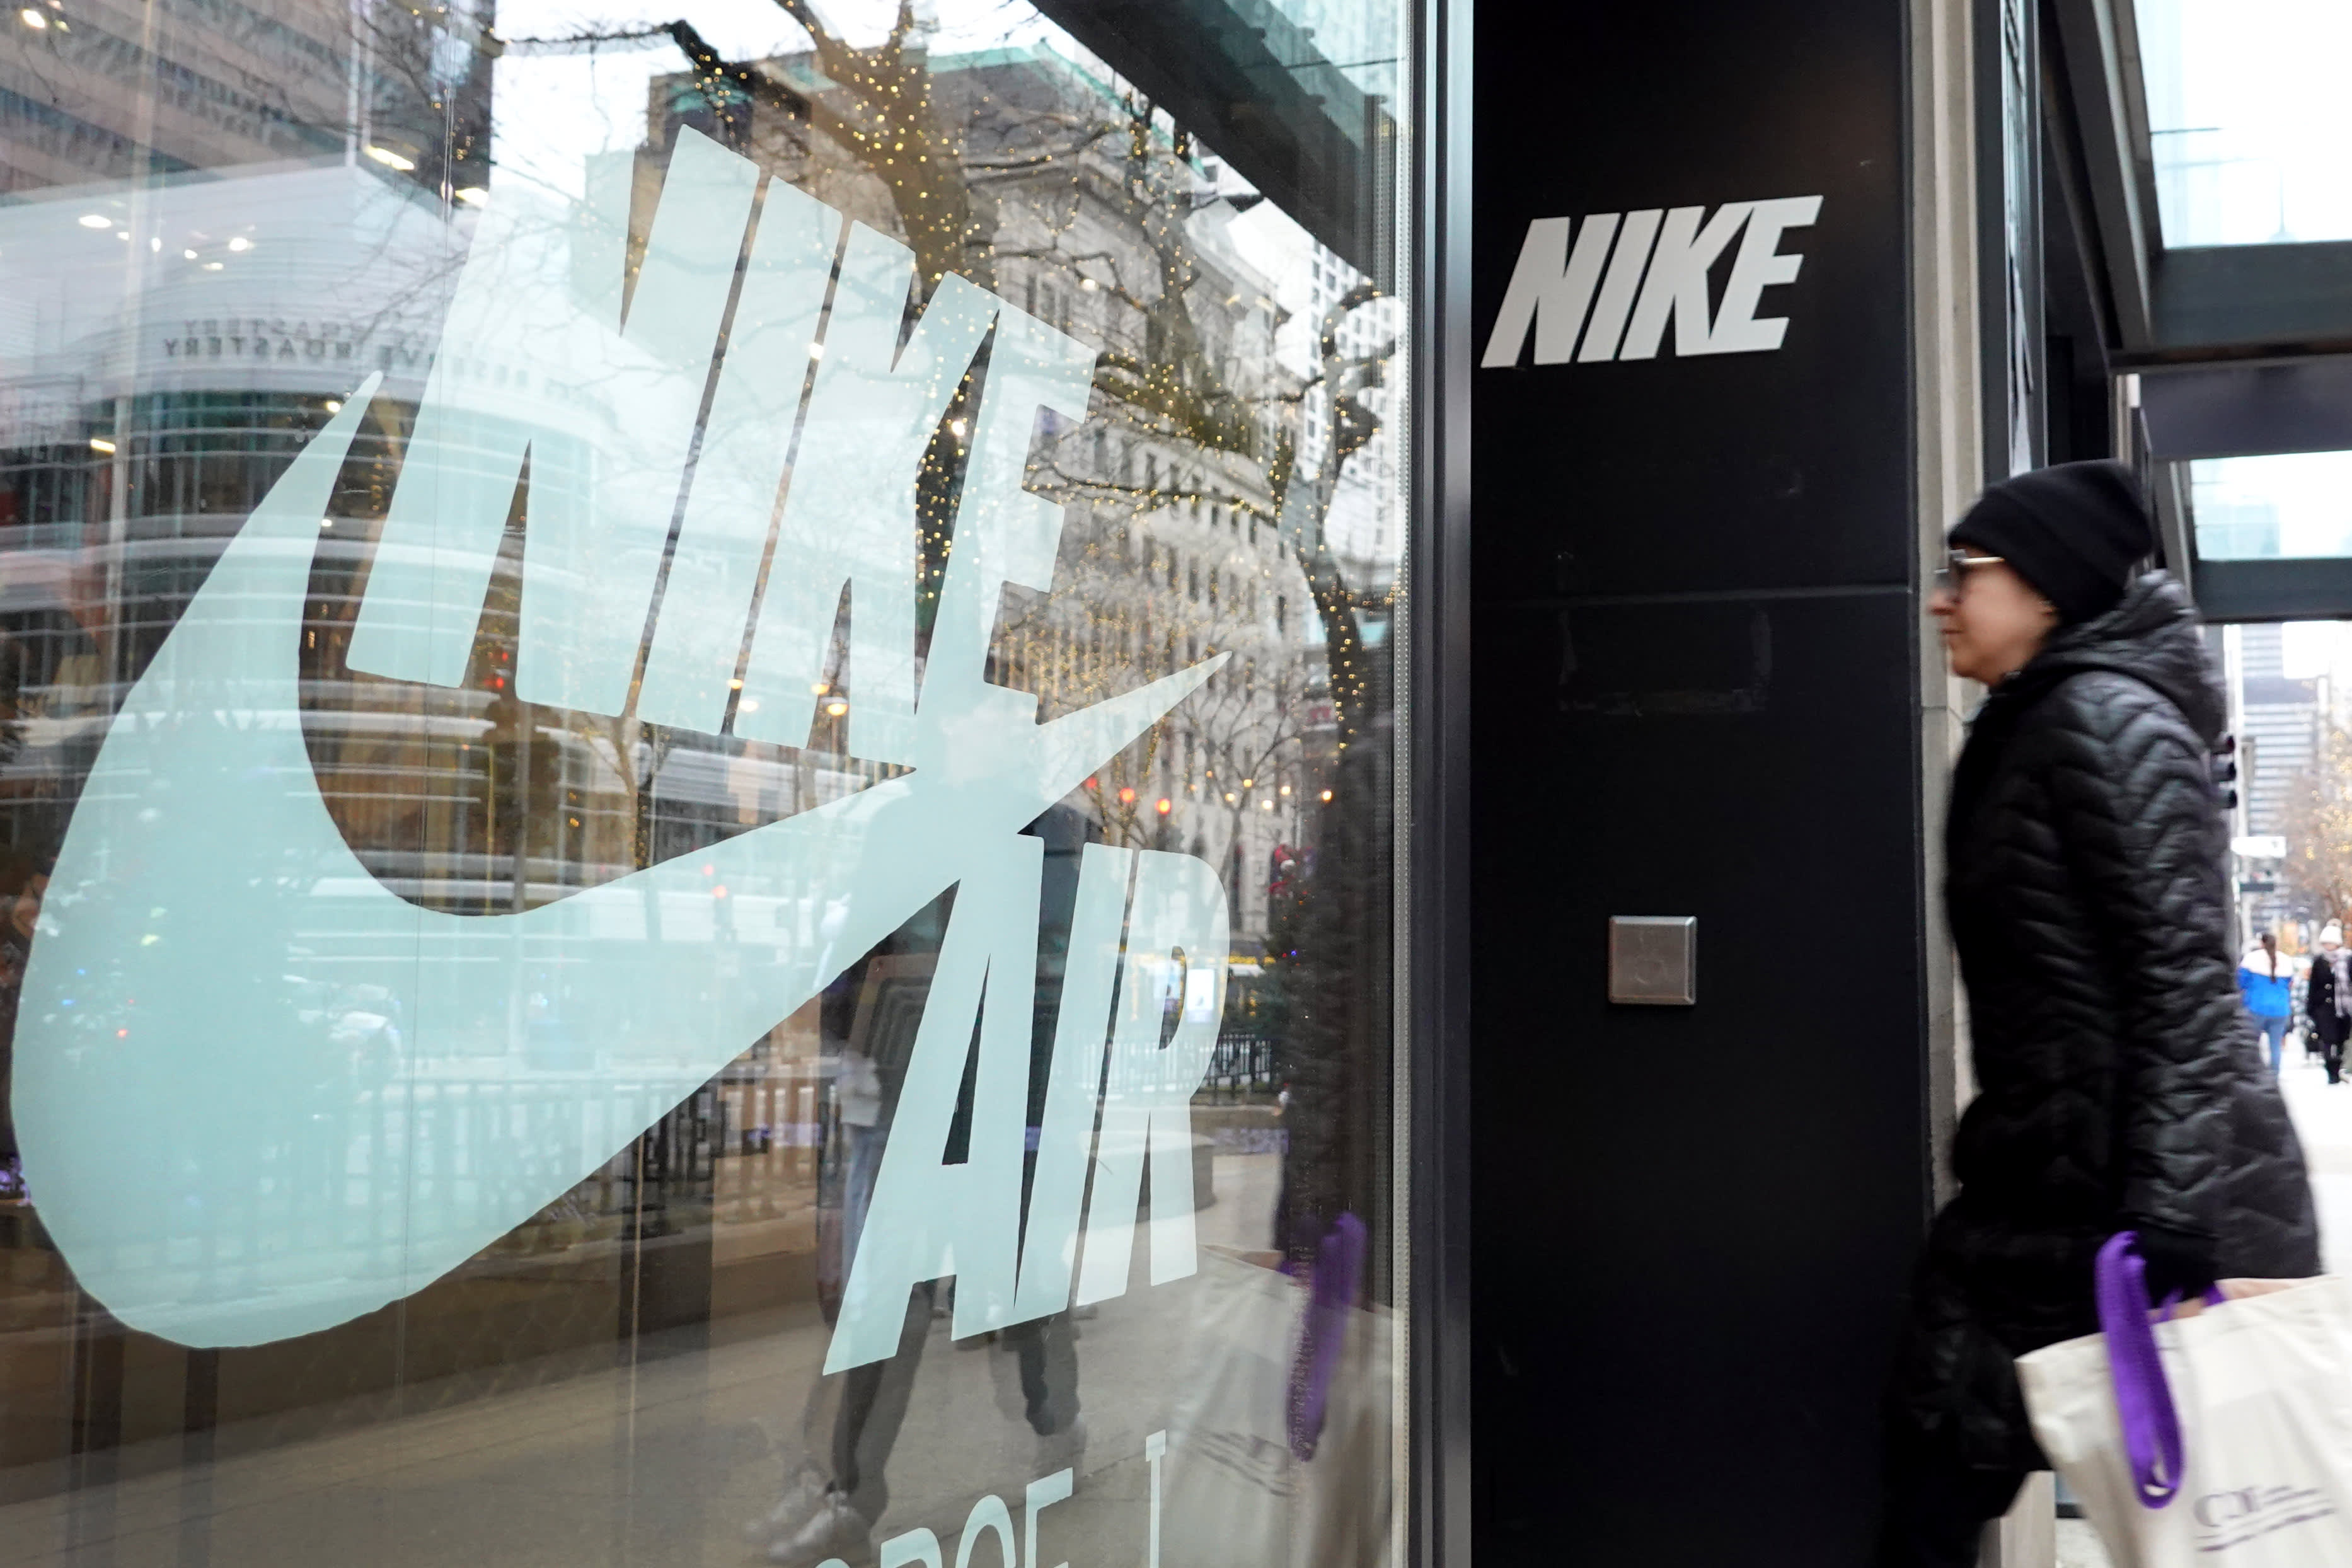 Barclays sees Nike shares surging more than 20% after the apparel giant's latest earnings report